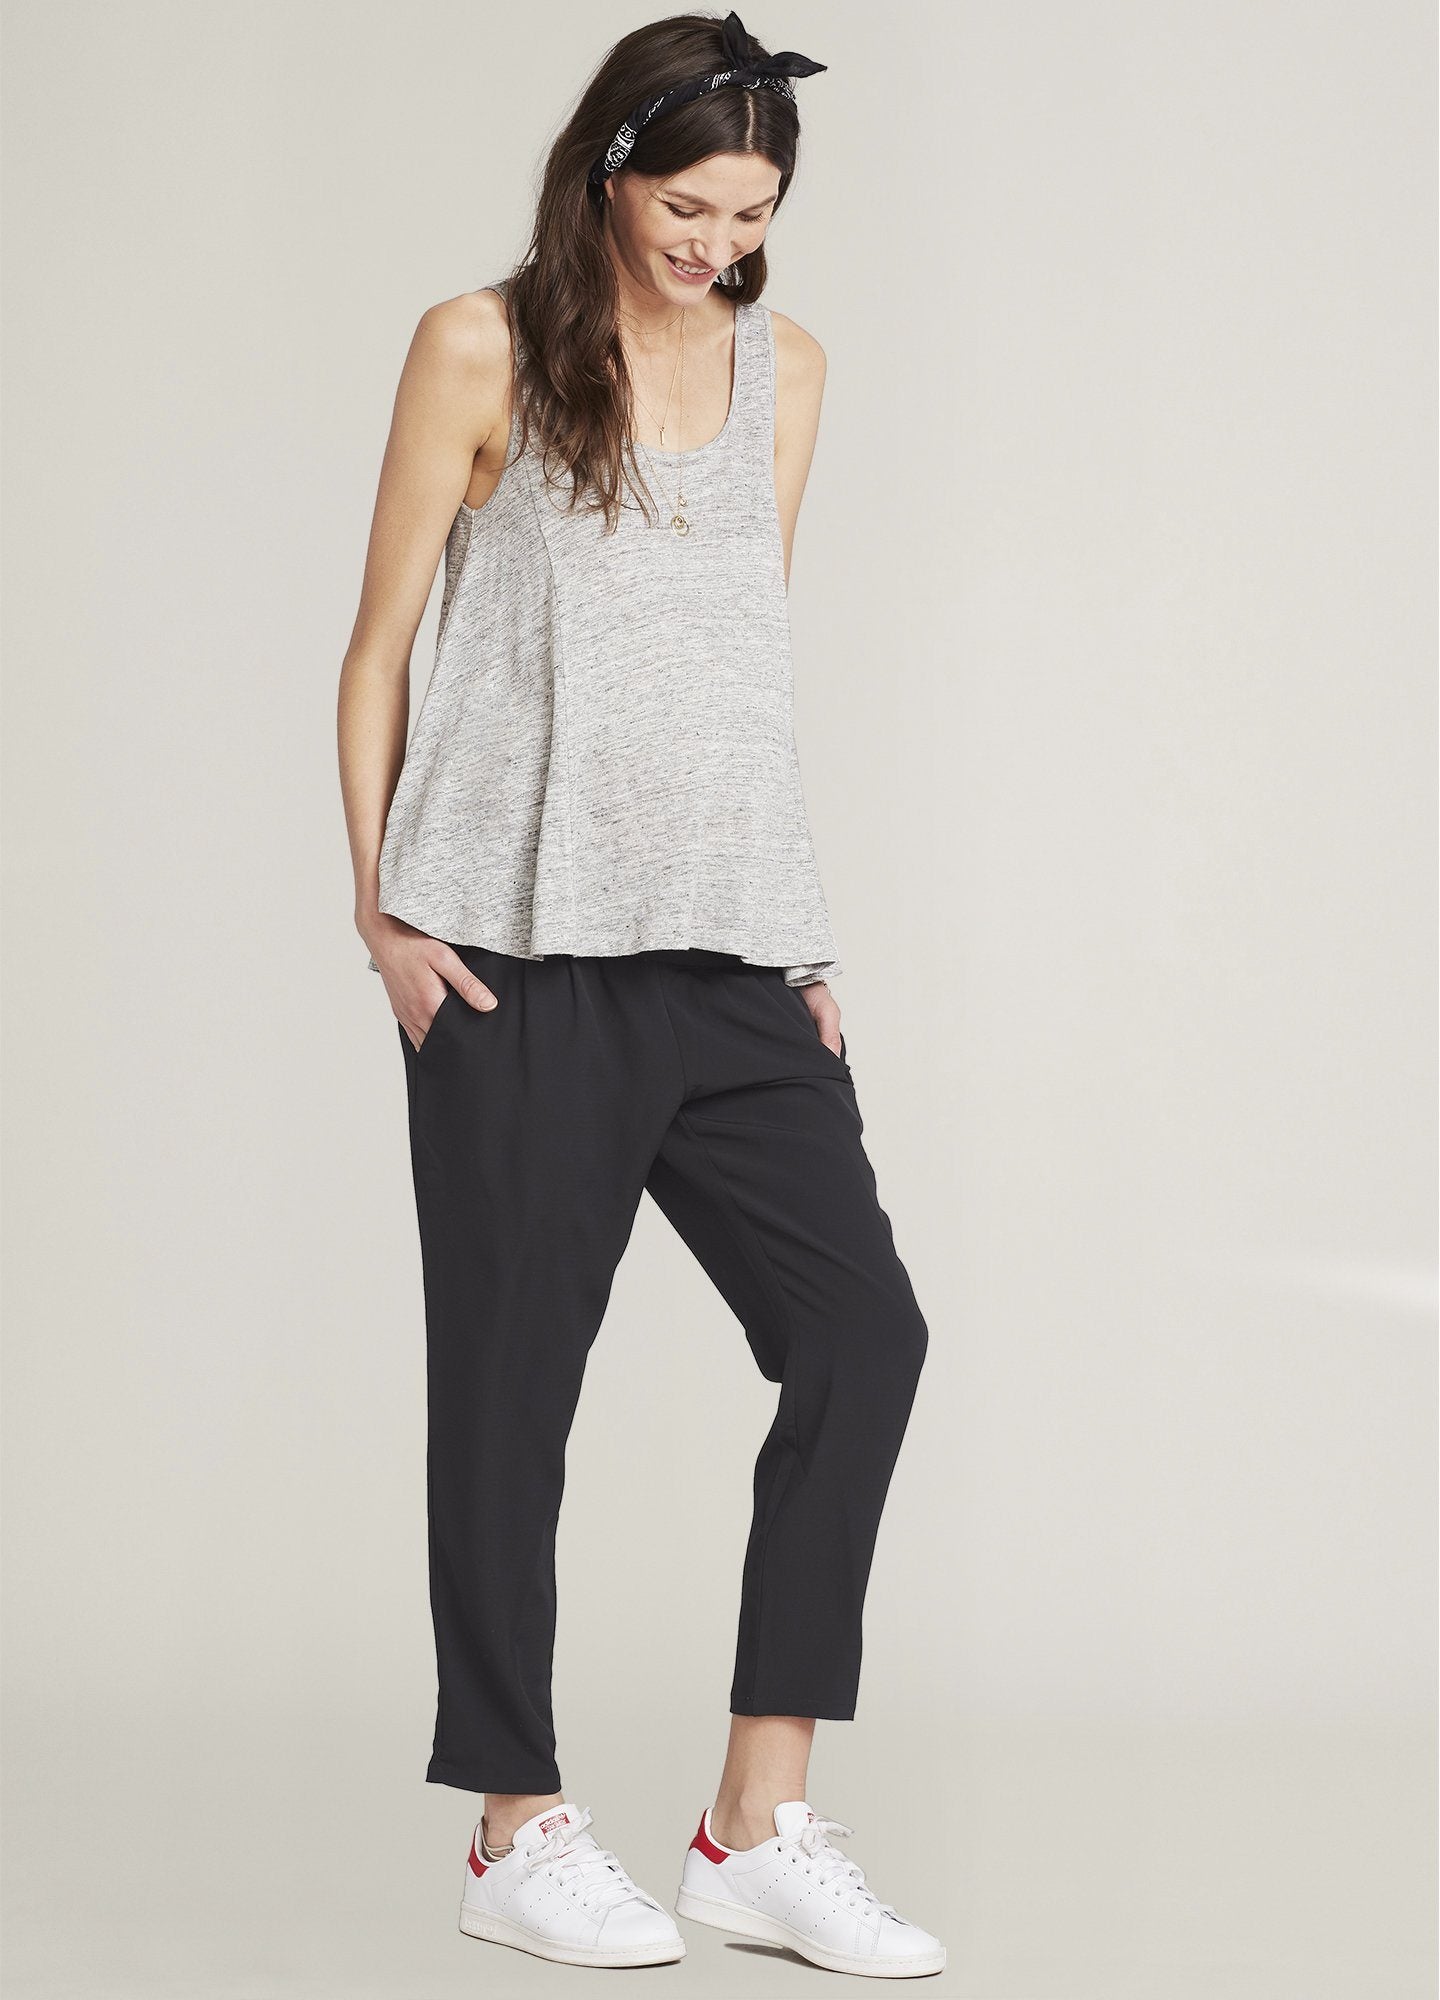 Linen Swing Tank - Chic Maternity Top | HATCH Collection – HATCH Collection